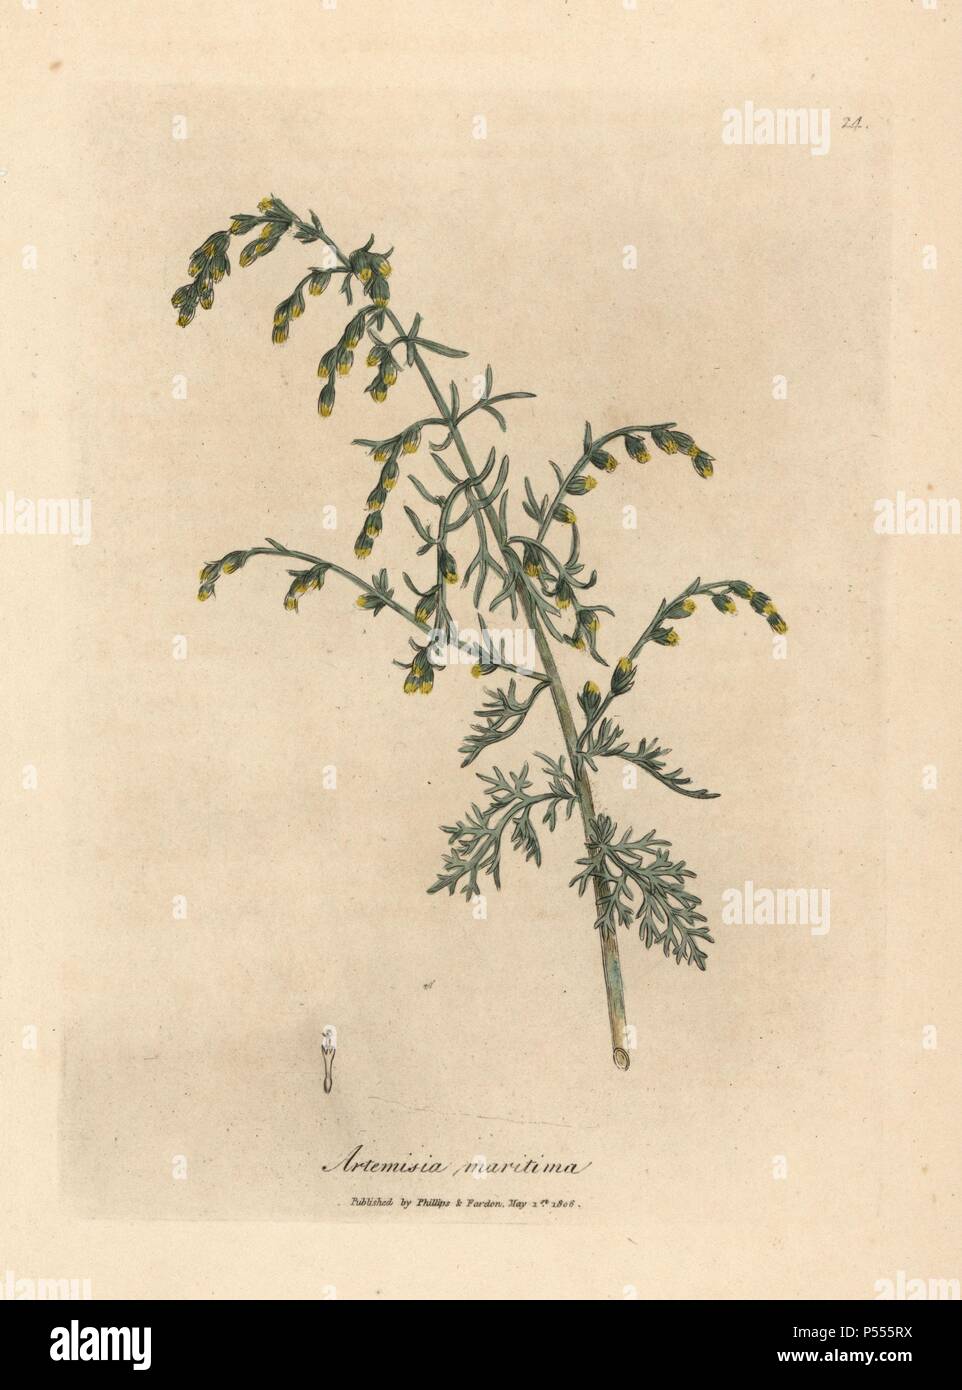 Sea wormwood, Artemisia maritima. Handcoloured copperplate engraving from a botanical illustration by James Sowerby from William Woodville and Sir William Jackson Hooker's 'Medical Botany,' John Bohn, London, 1832. The tireless Sowerby (1757-1822) drew over 2, 500 plants for Smith's mammoth 'English Botany' (1790-1814) and 440 mushrooms for 'Coloured Figures of English Fungi ' (1797) among many other works. Stock Photo